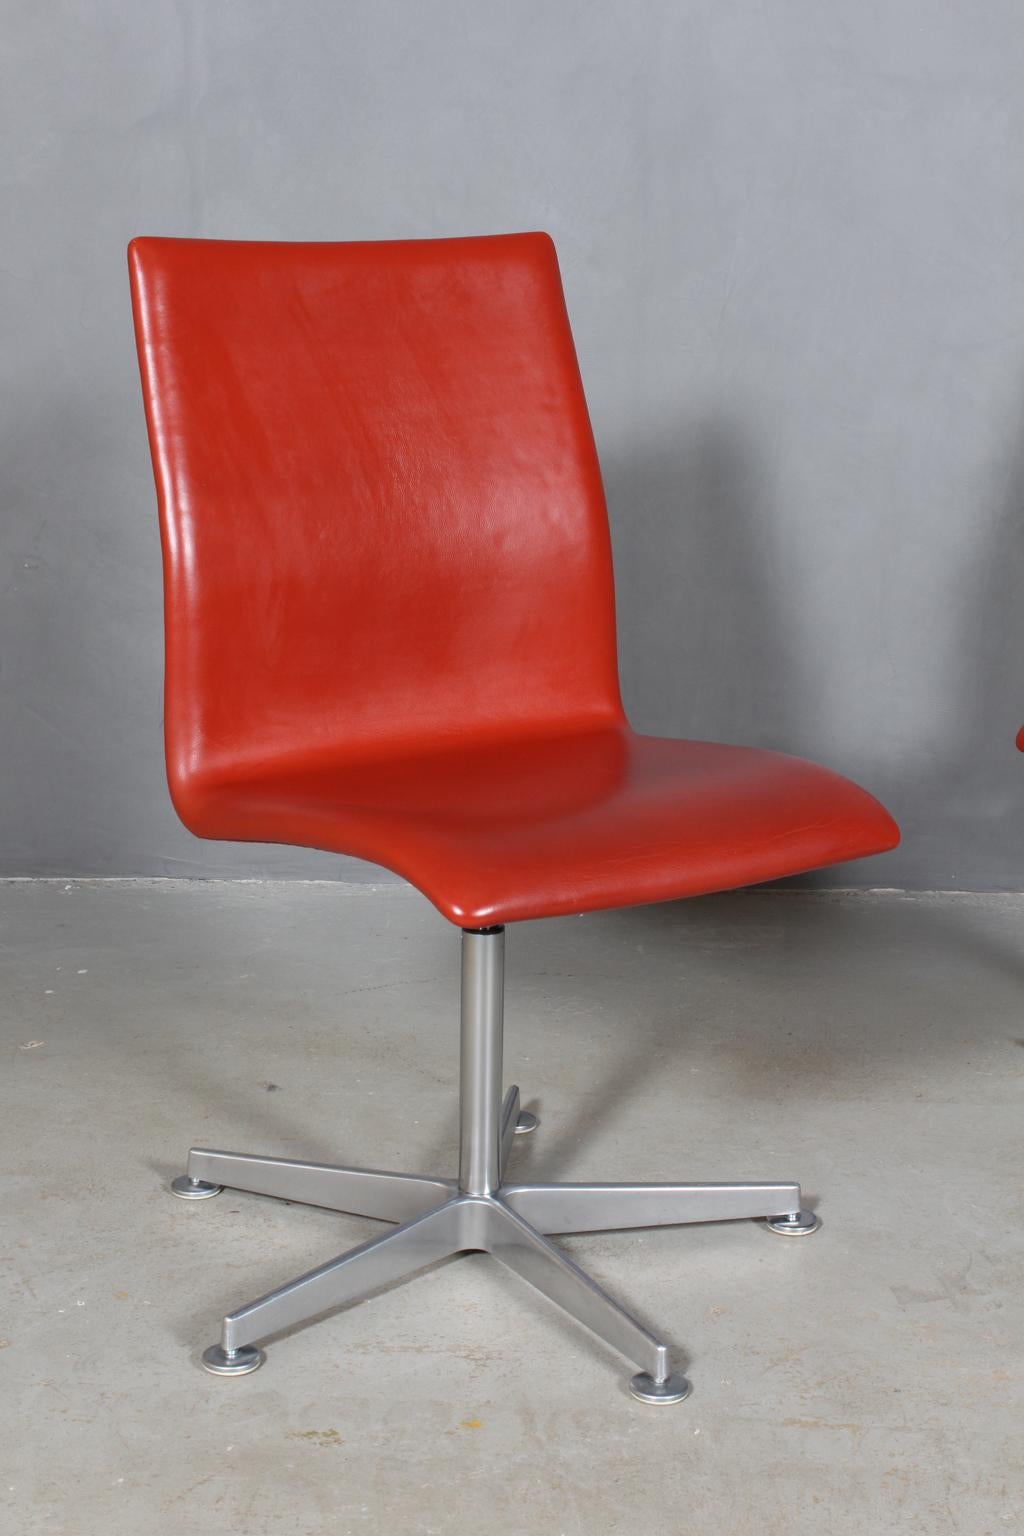 Arne Jacobsen Oxford chair five star base in aluminum. Turnable.

Original red leather upholstery

Made by Fritz Hansen in 2007, red label

Original Designed for the Oxford university.